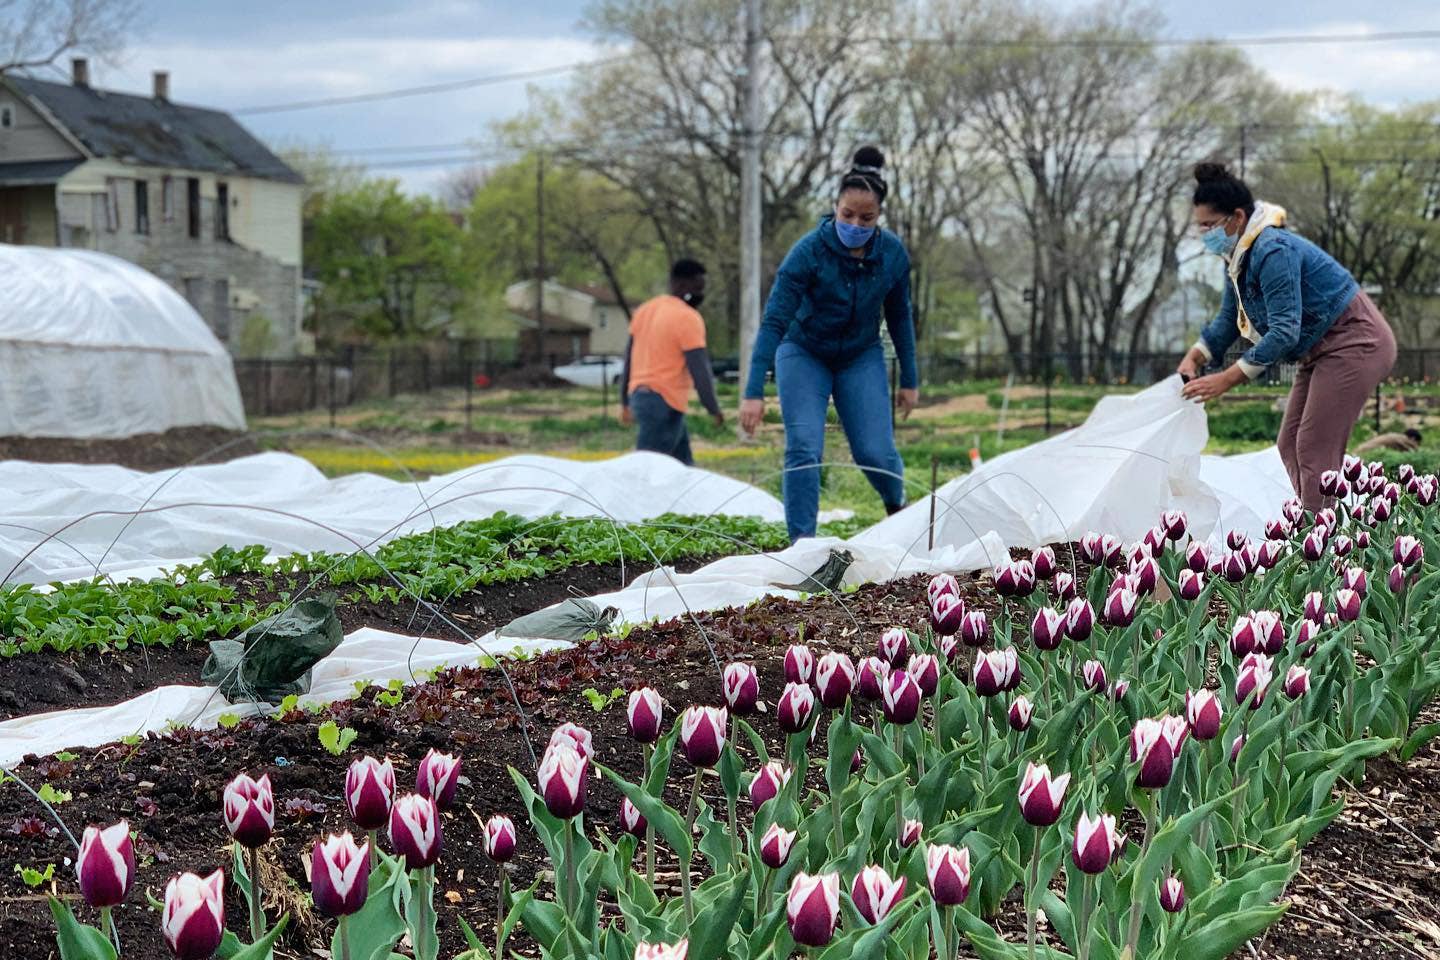 How a Neglected Plot of Land in Chicago Became Part of a Growing Urban Garden Movement